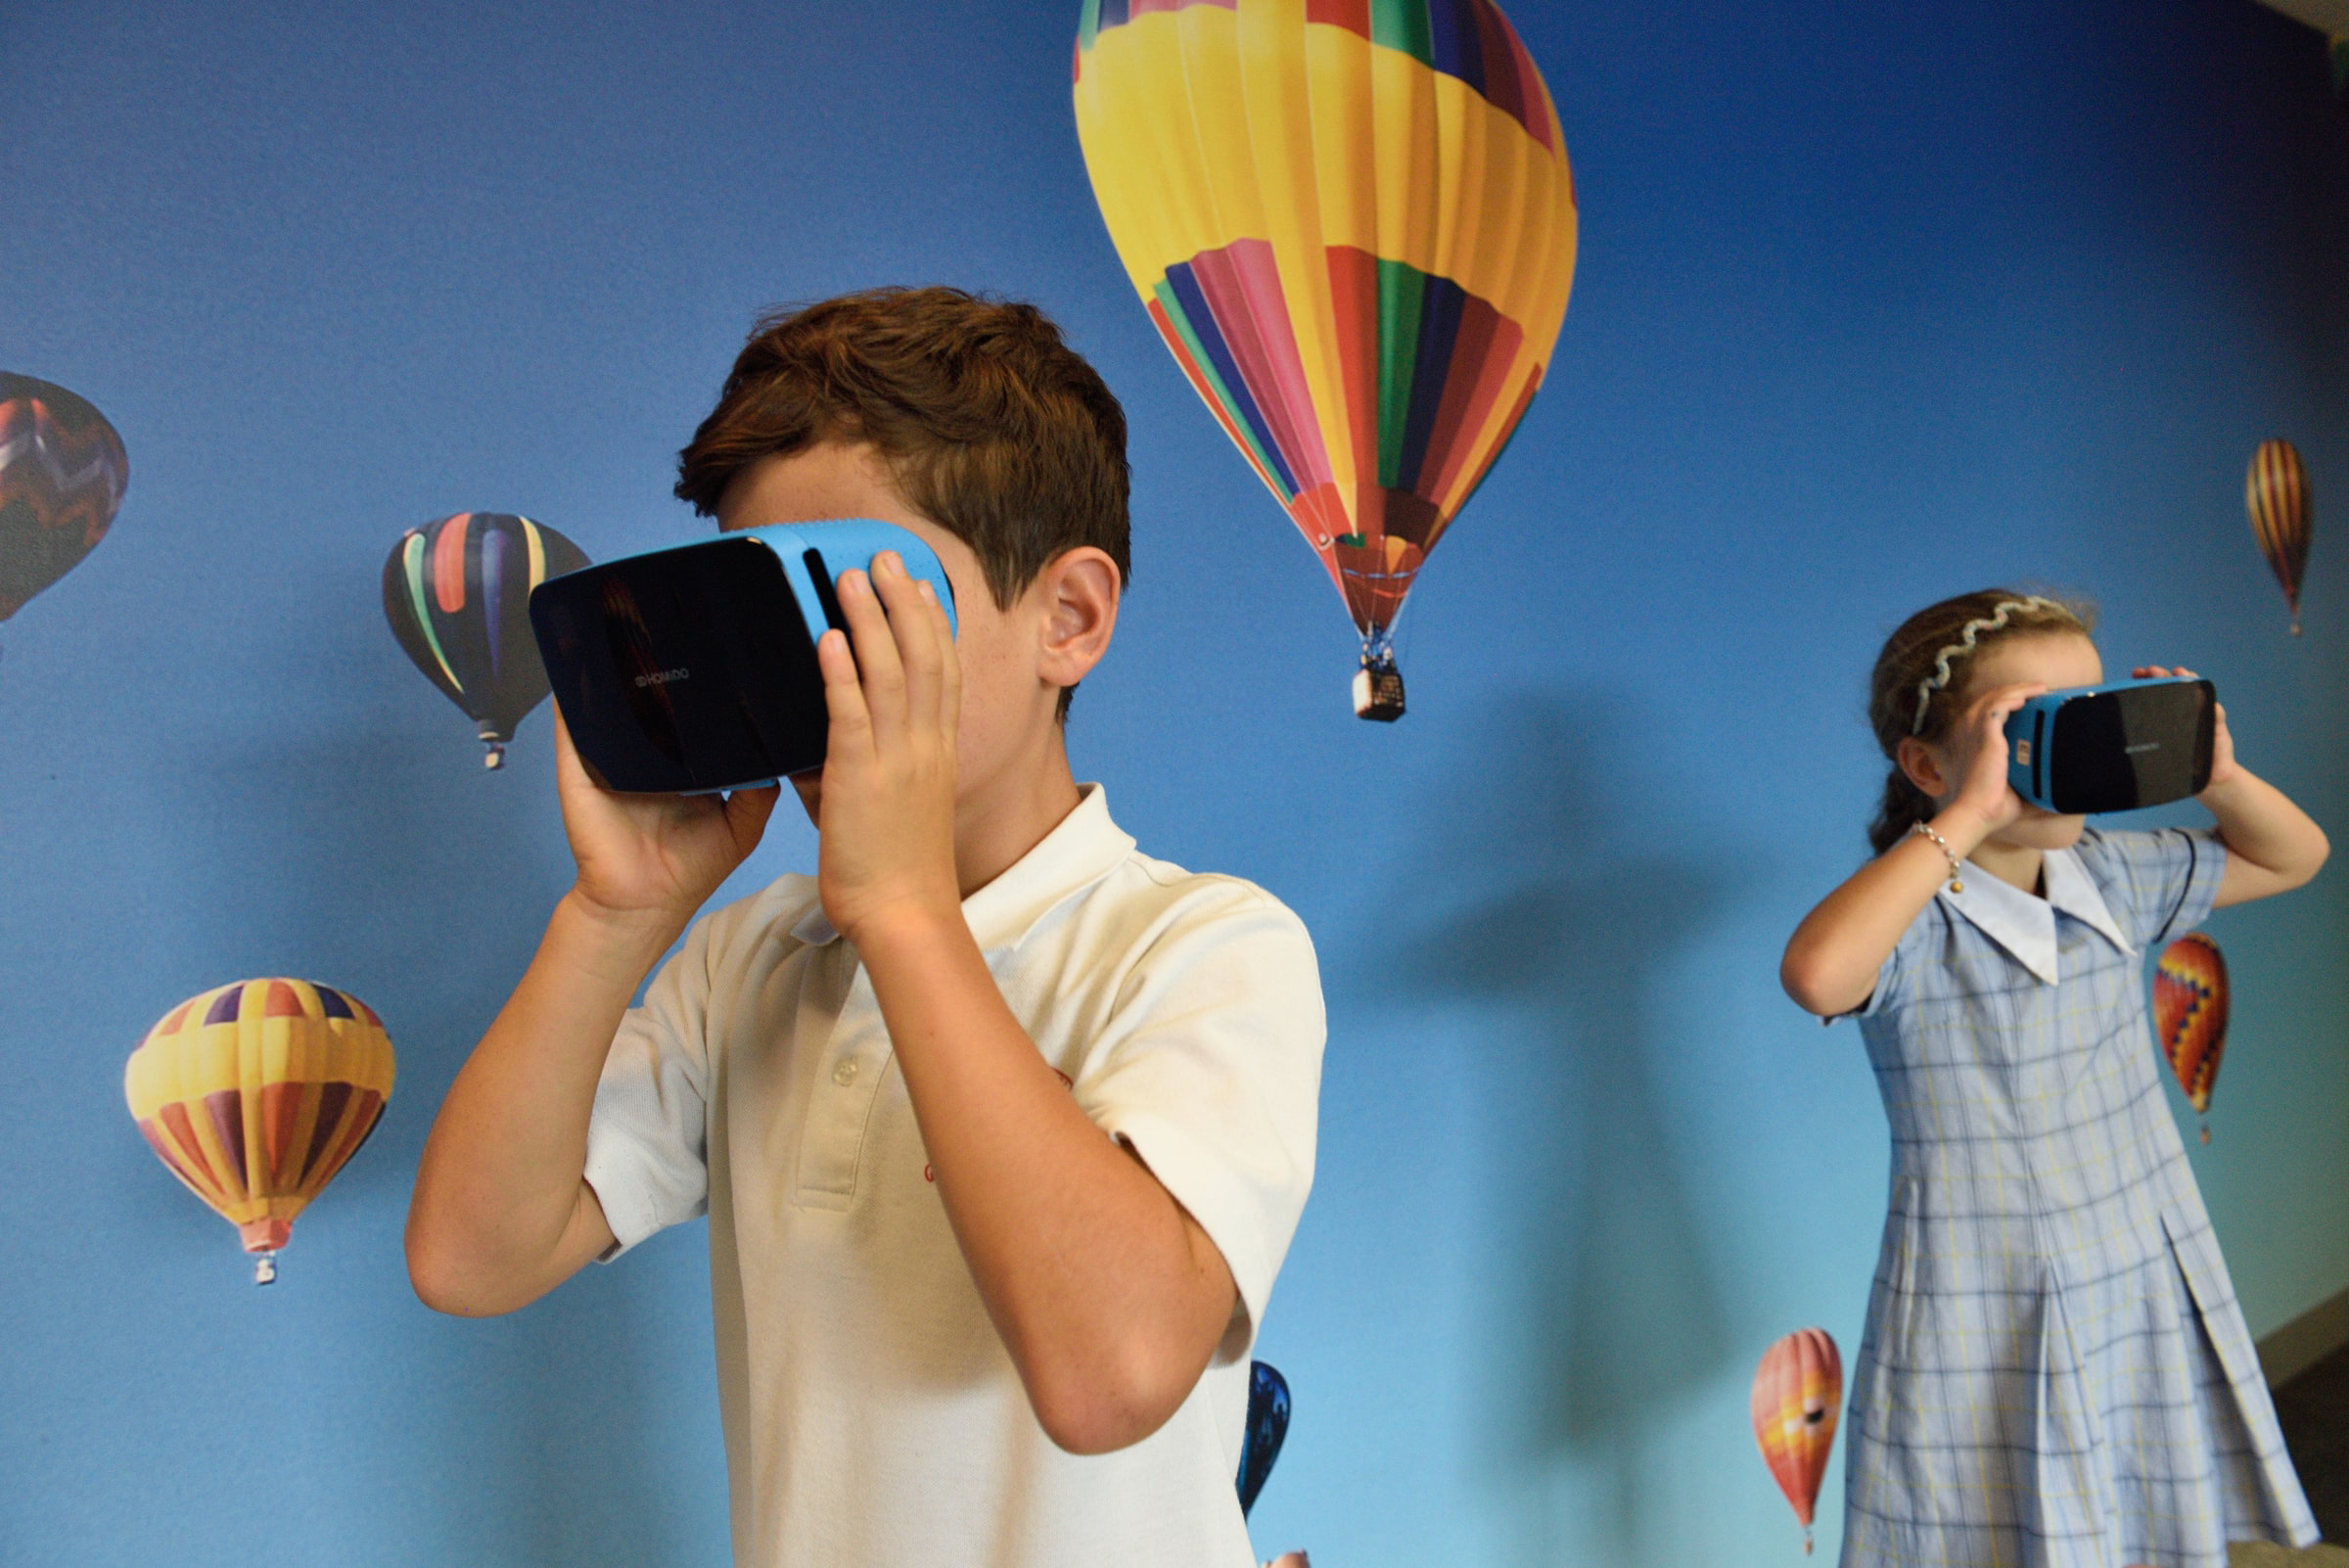 Which engine to choose? Two children in virtual reality